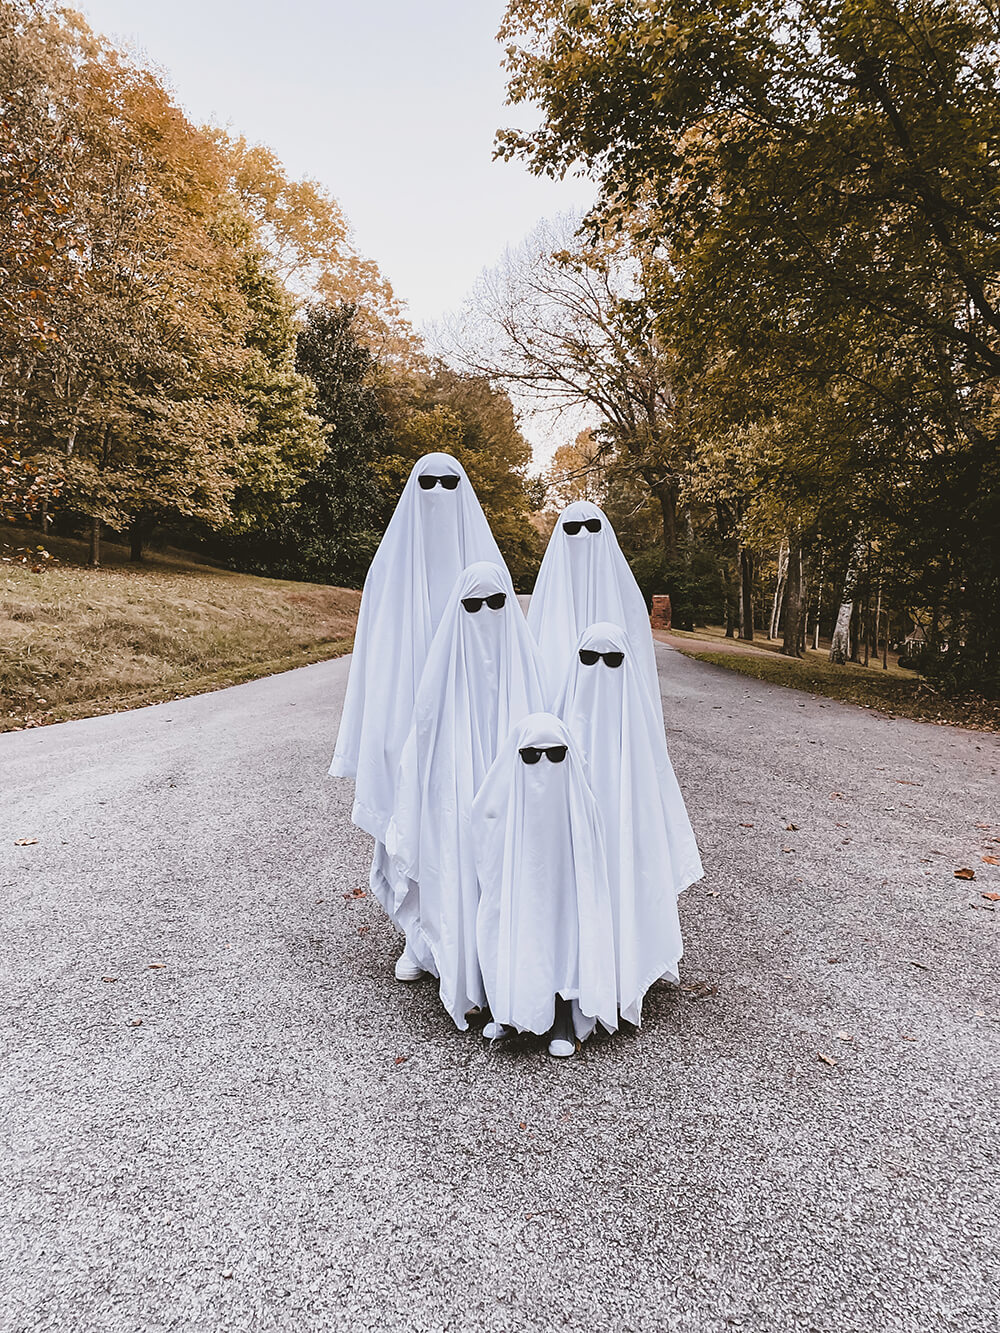 Need an easy DIY Halloween Costume Idea? I am sharing our take on the classic ghost costume for this year's costumes for the kids. We had so much fun with this one! Catch it now on KaraLayne.com.